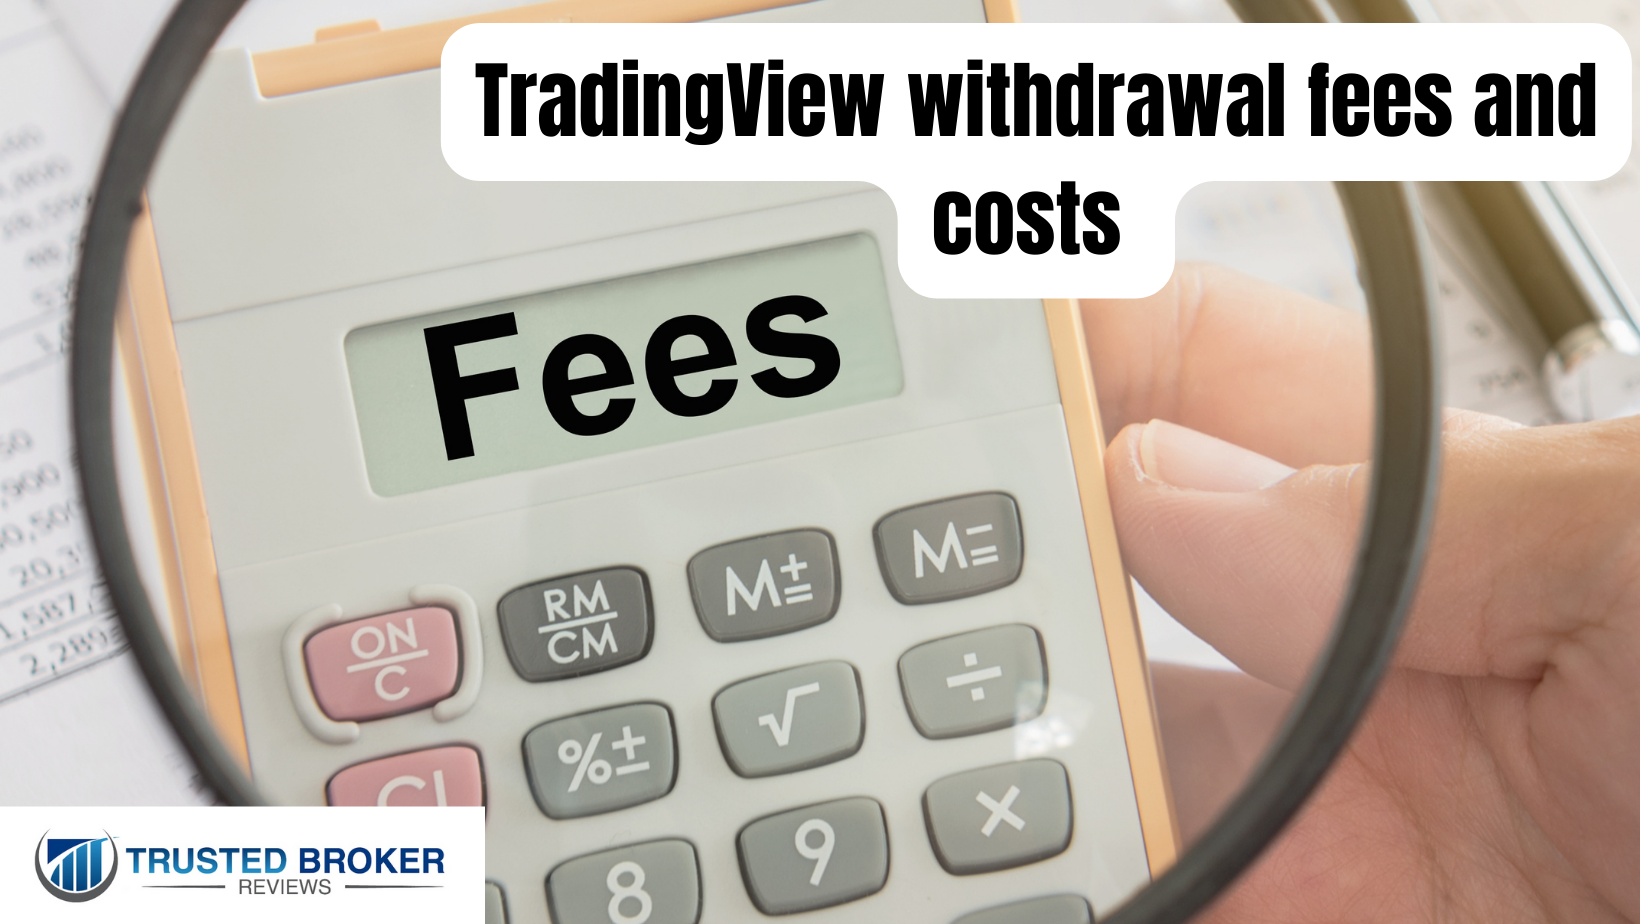 TradingView withdrawal fees and costs